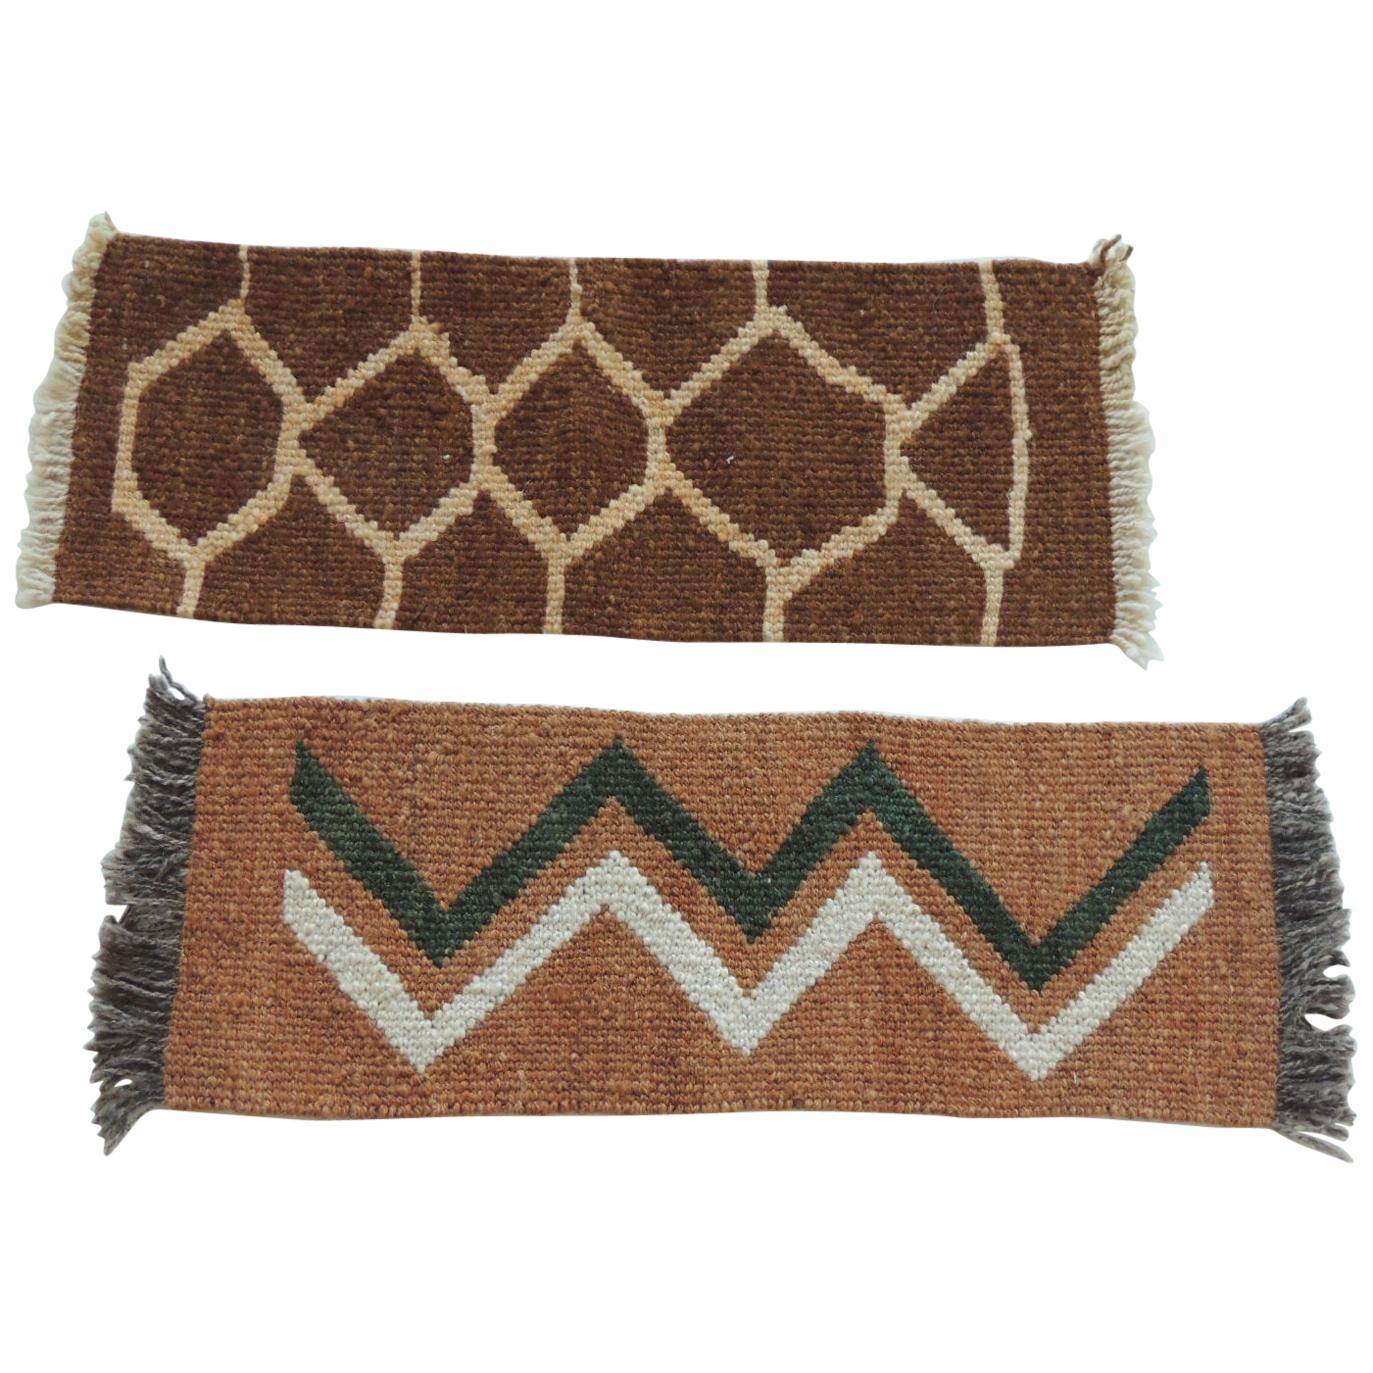 Pair of Vintage Camel and Brown Woven Rug Samples